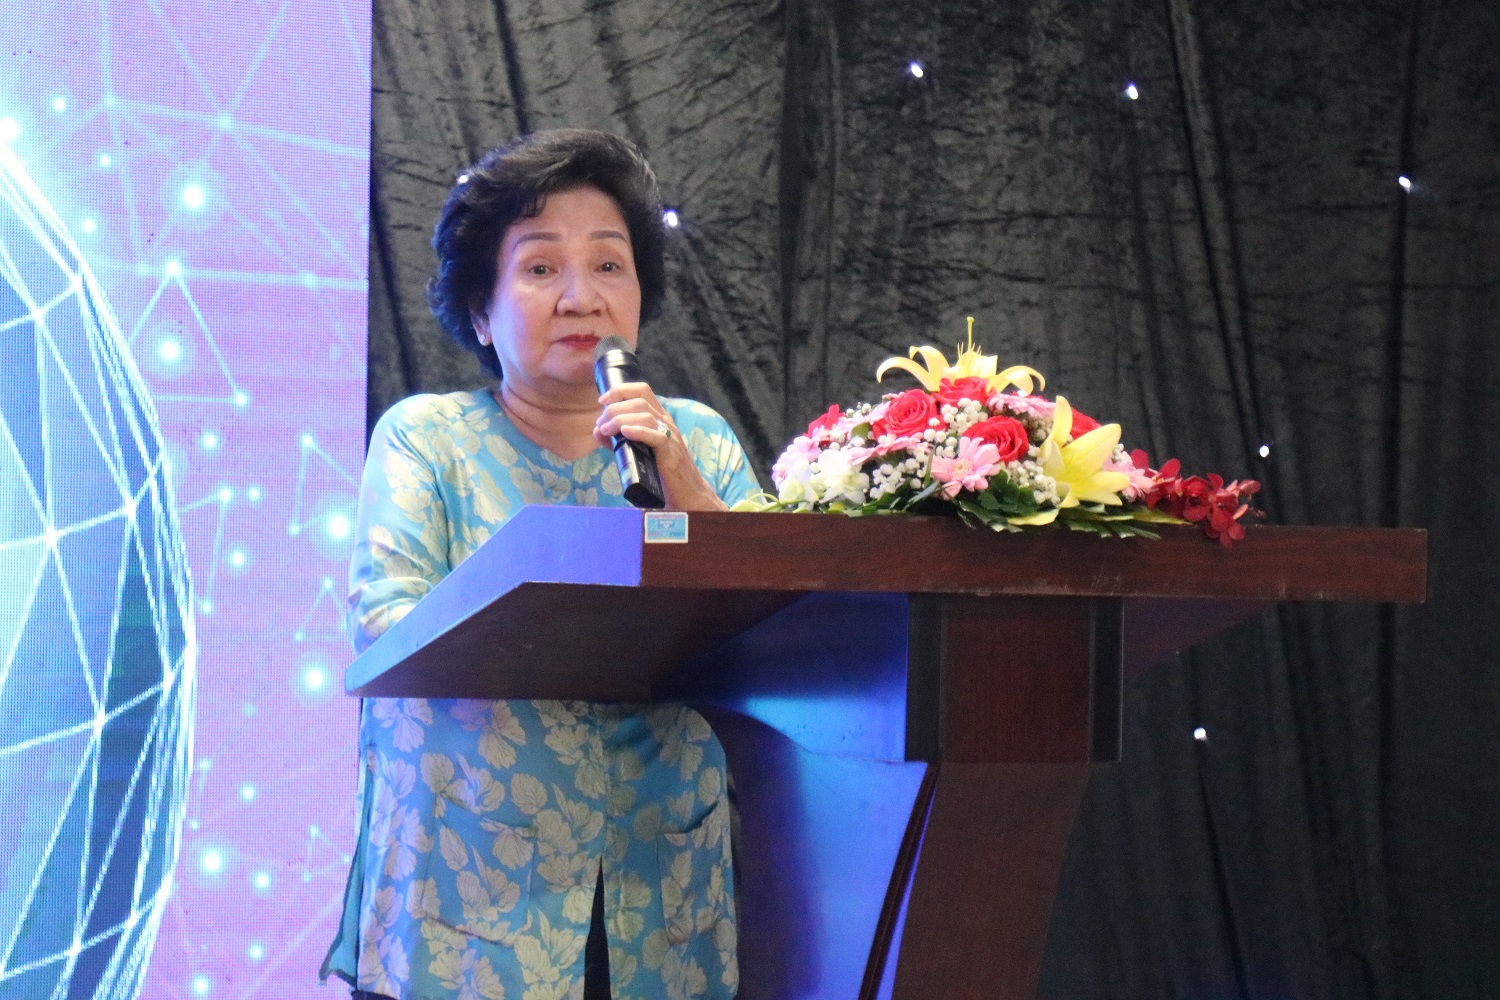 Ms. Pham Thi Huan - Chairperson of Ba Huan - spoke at the event